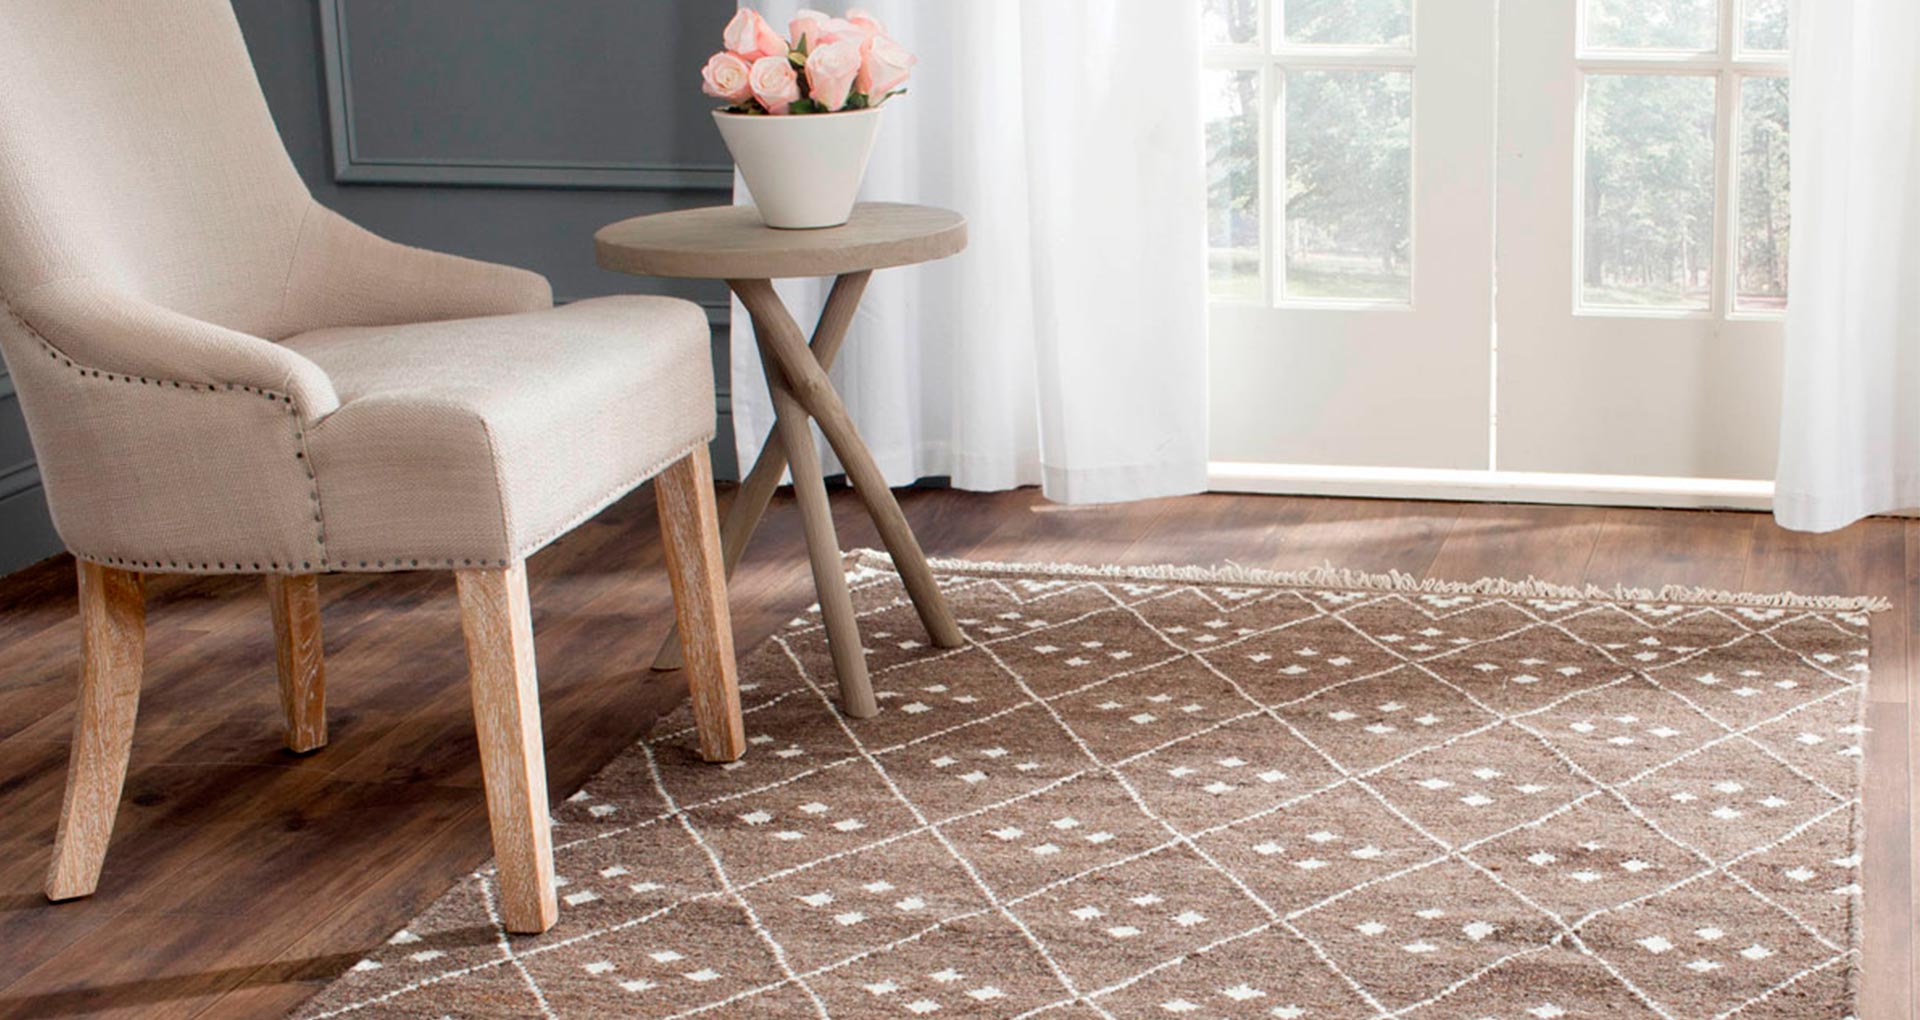 Why Invest In A Handmade Area Rug?